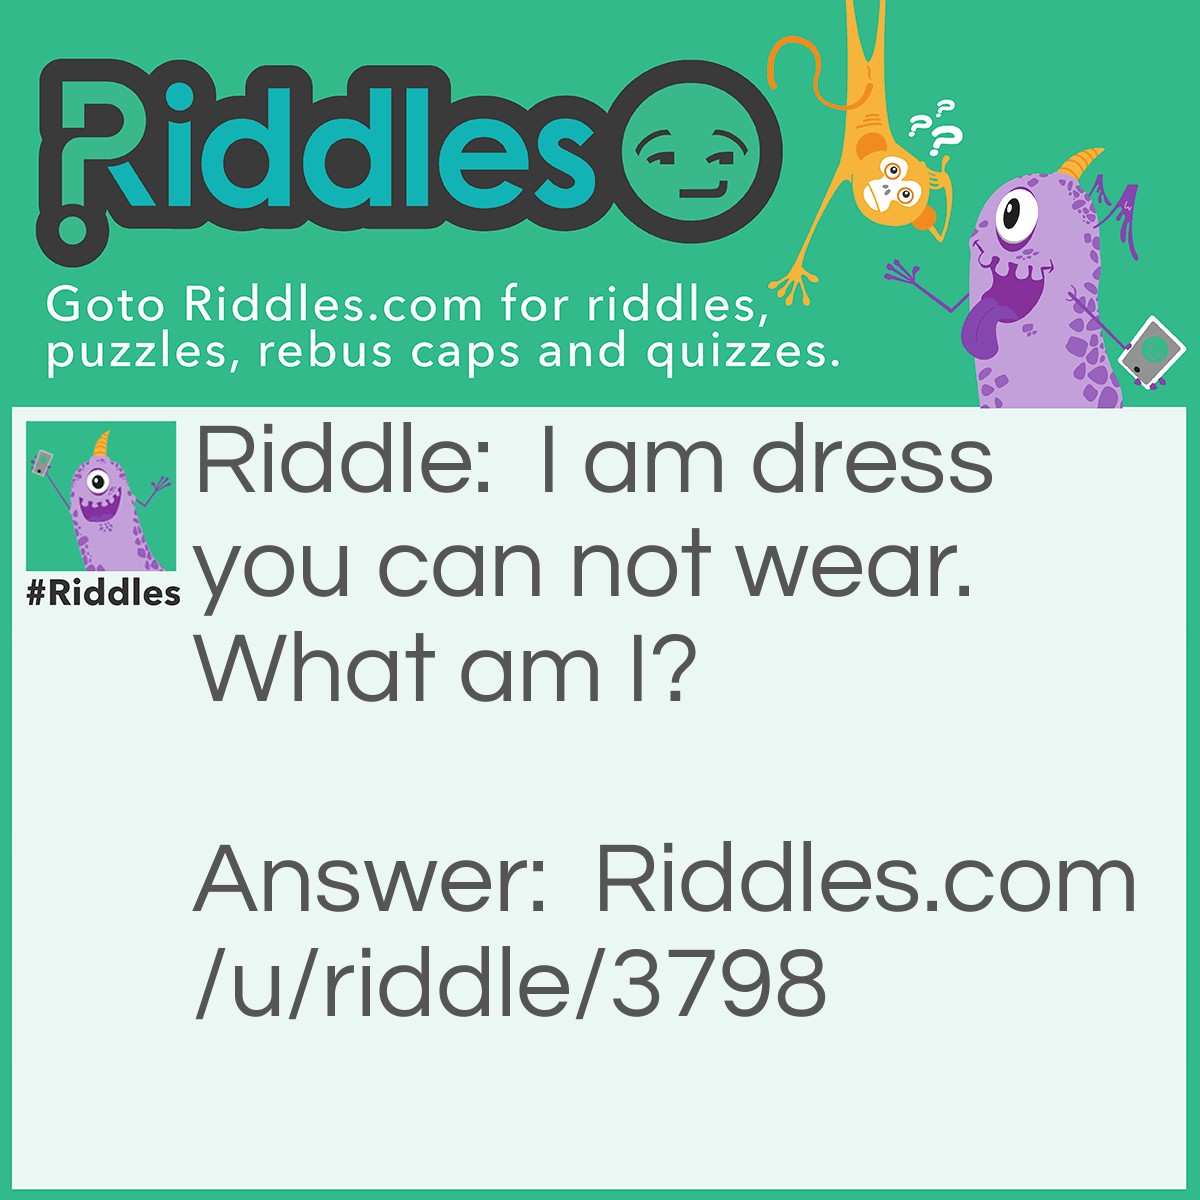 Riddle: I am dress you can not wear. What am I? Answer: An address!